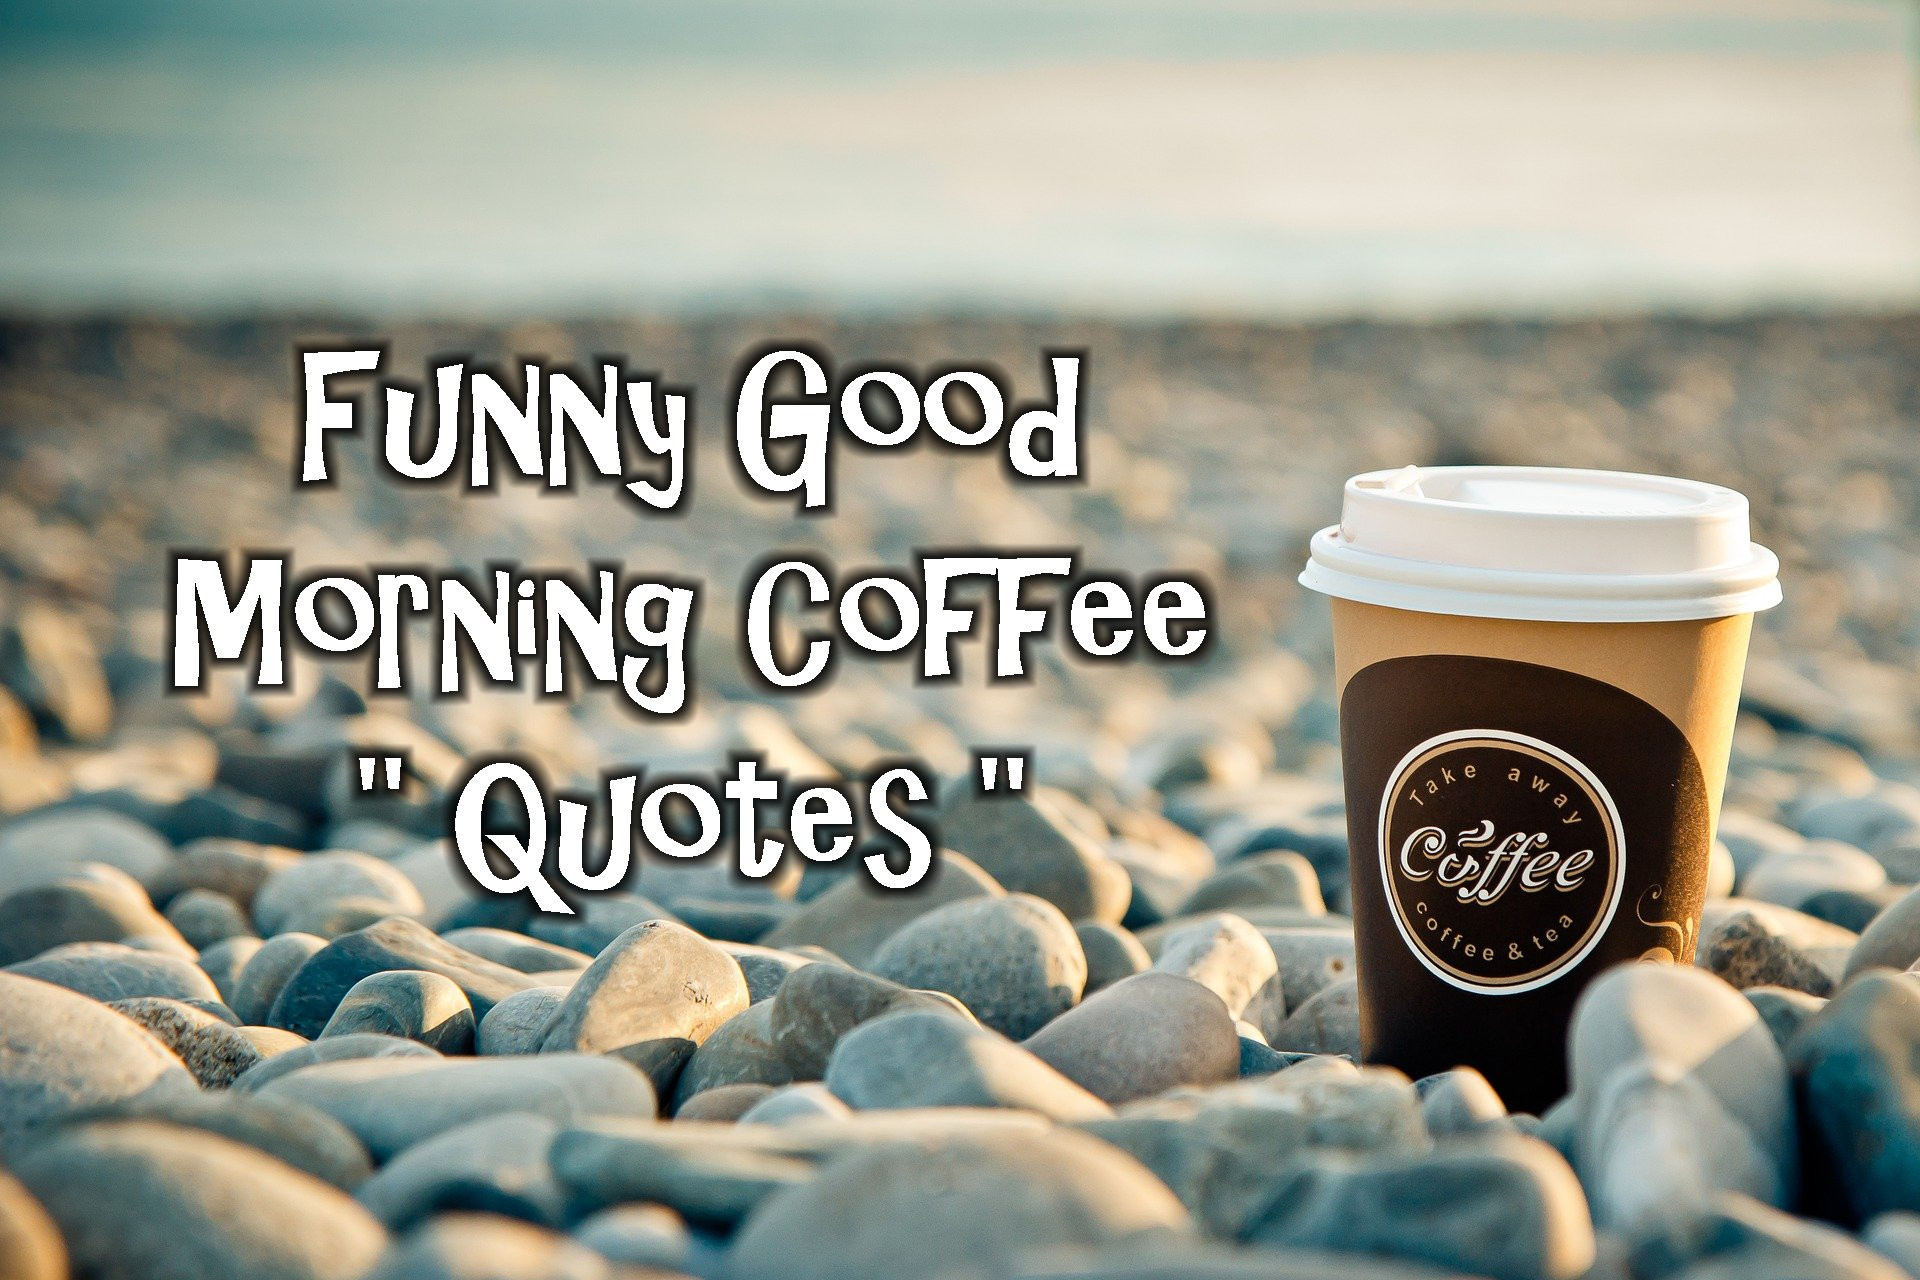 Funny Coffee Quotes And Sayings
 Funny Good Morning Coffee Quotes CoffeeNWine